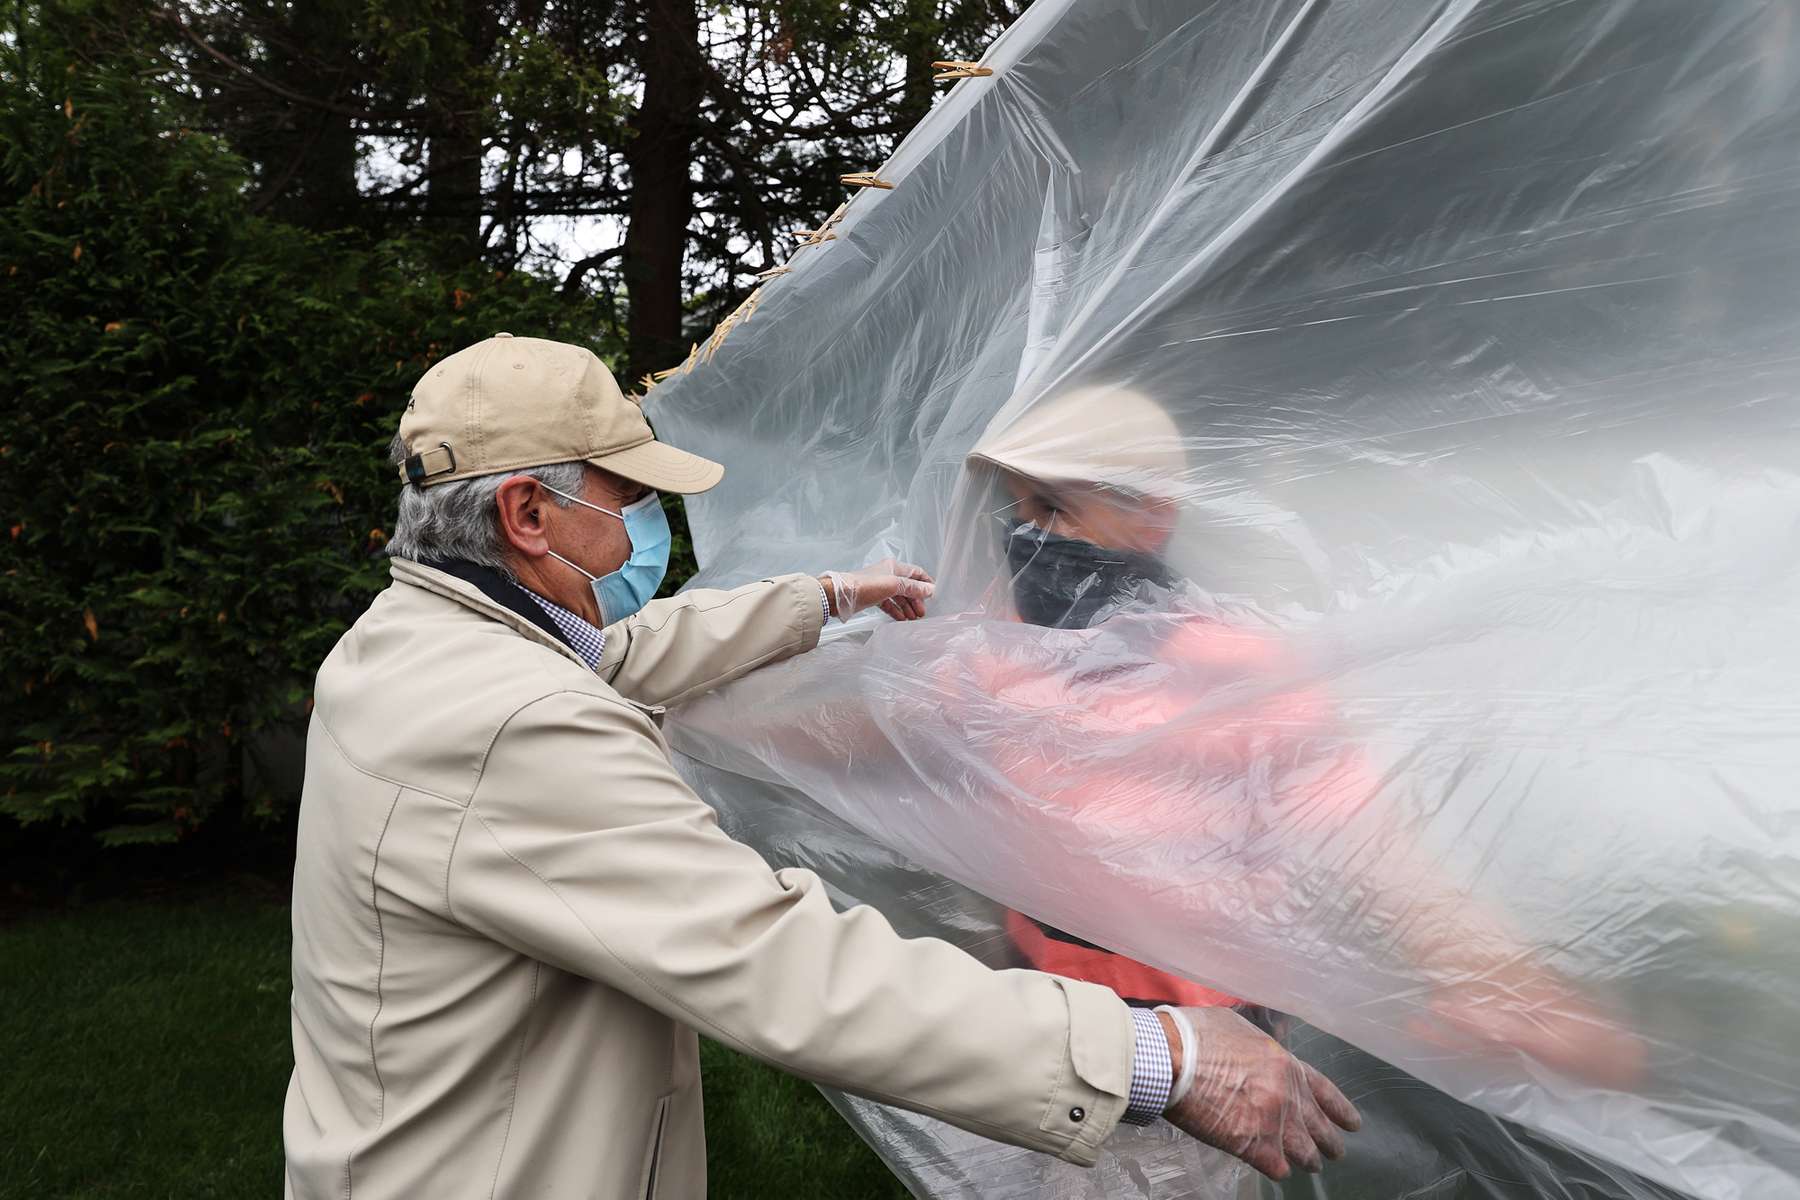 Frank Sileo hugs his Father Domenic Sileo through a plastic drop cloth hung up on a homemade clothes line during Memorial Day Weekend on May 24, 2020 in Wantagh, New York.  It is the first time they have had physical contact of any kind since the coronavirus COVID-19 pandemic lockdown started in late February.  